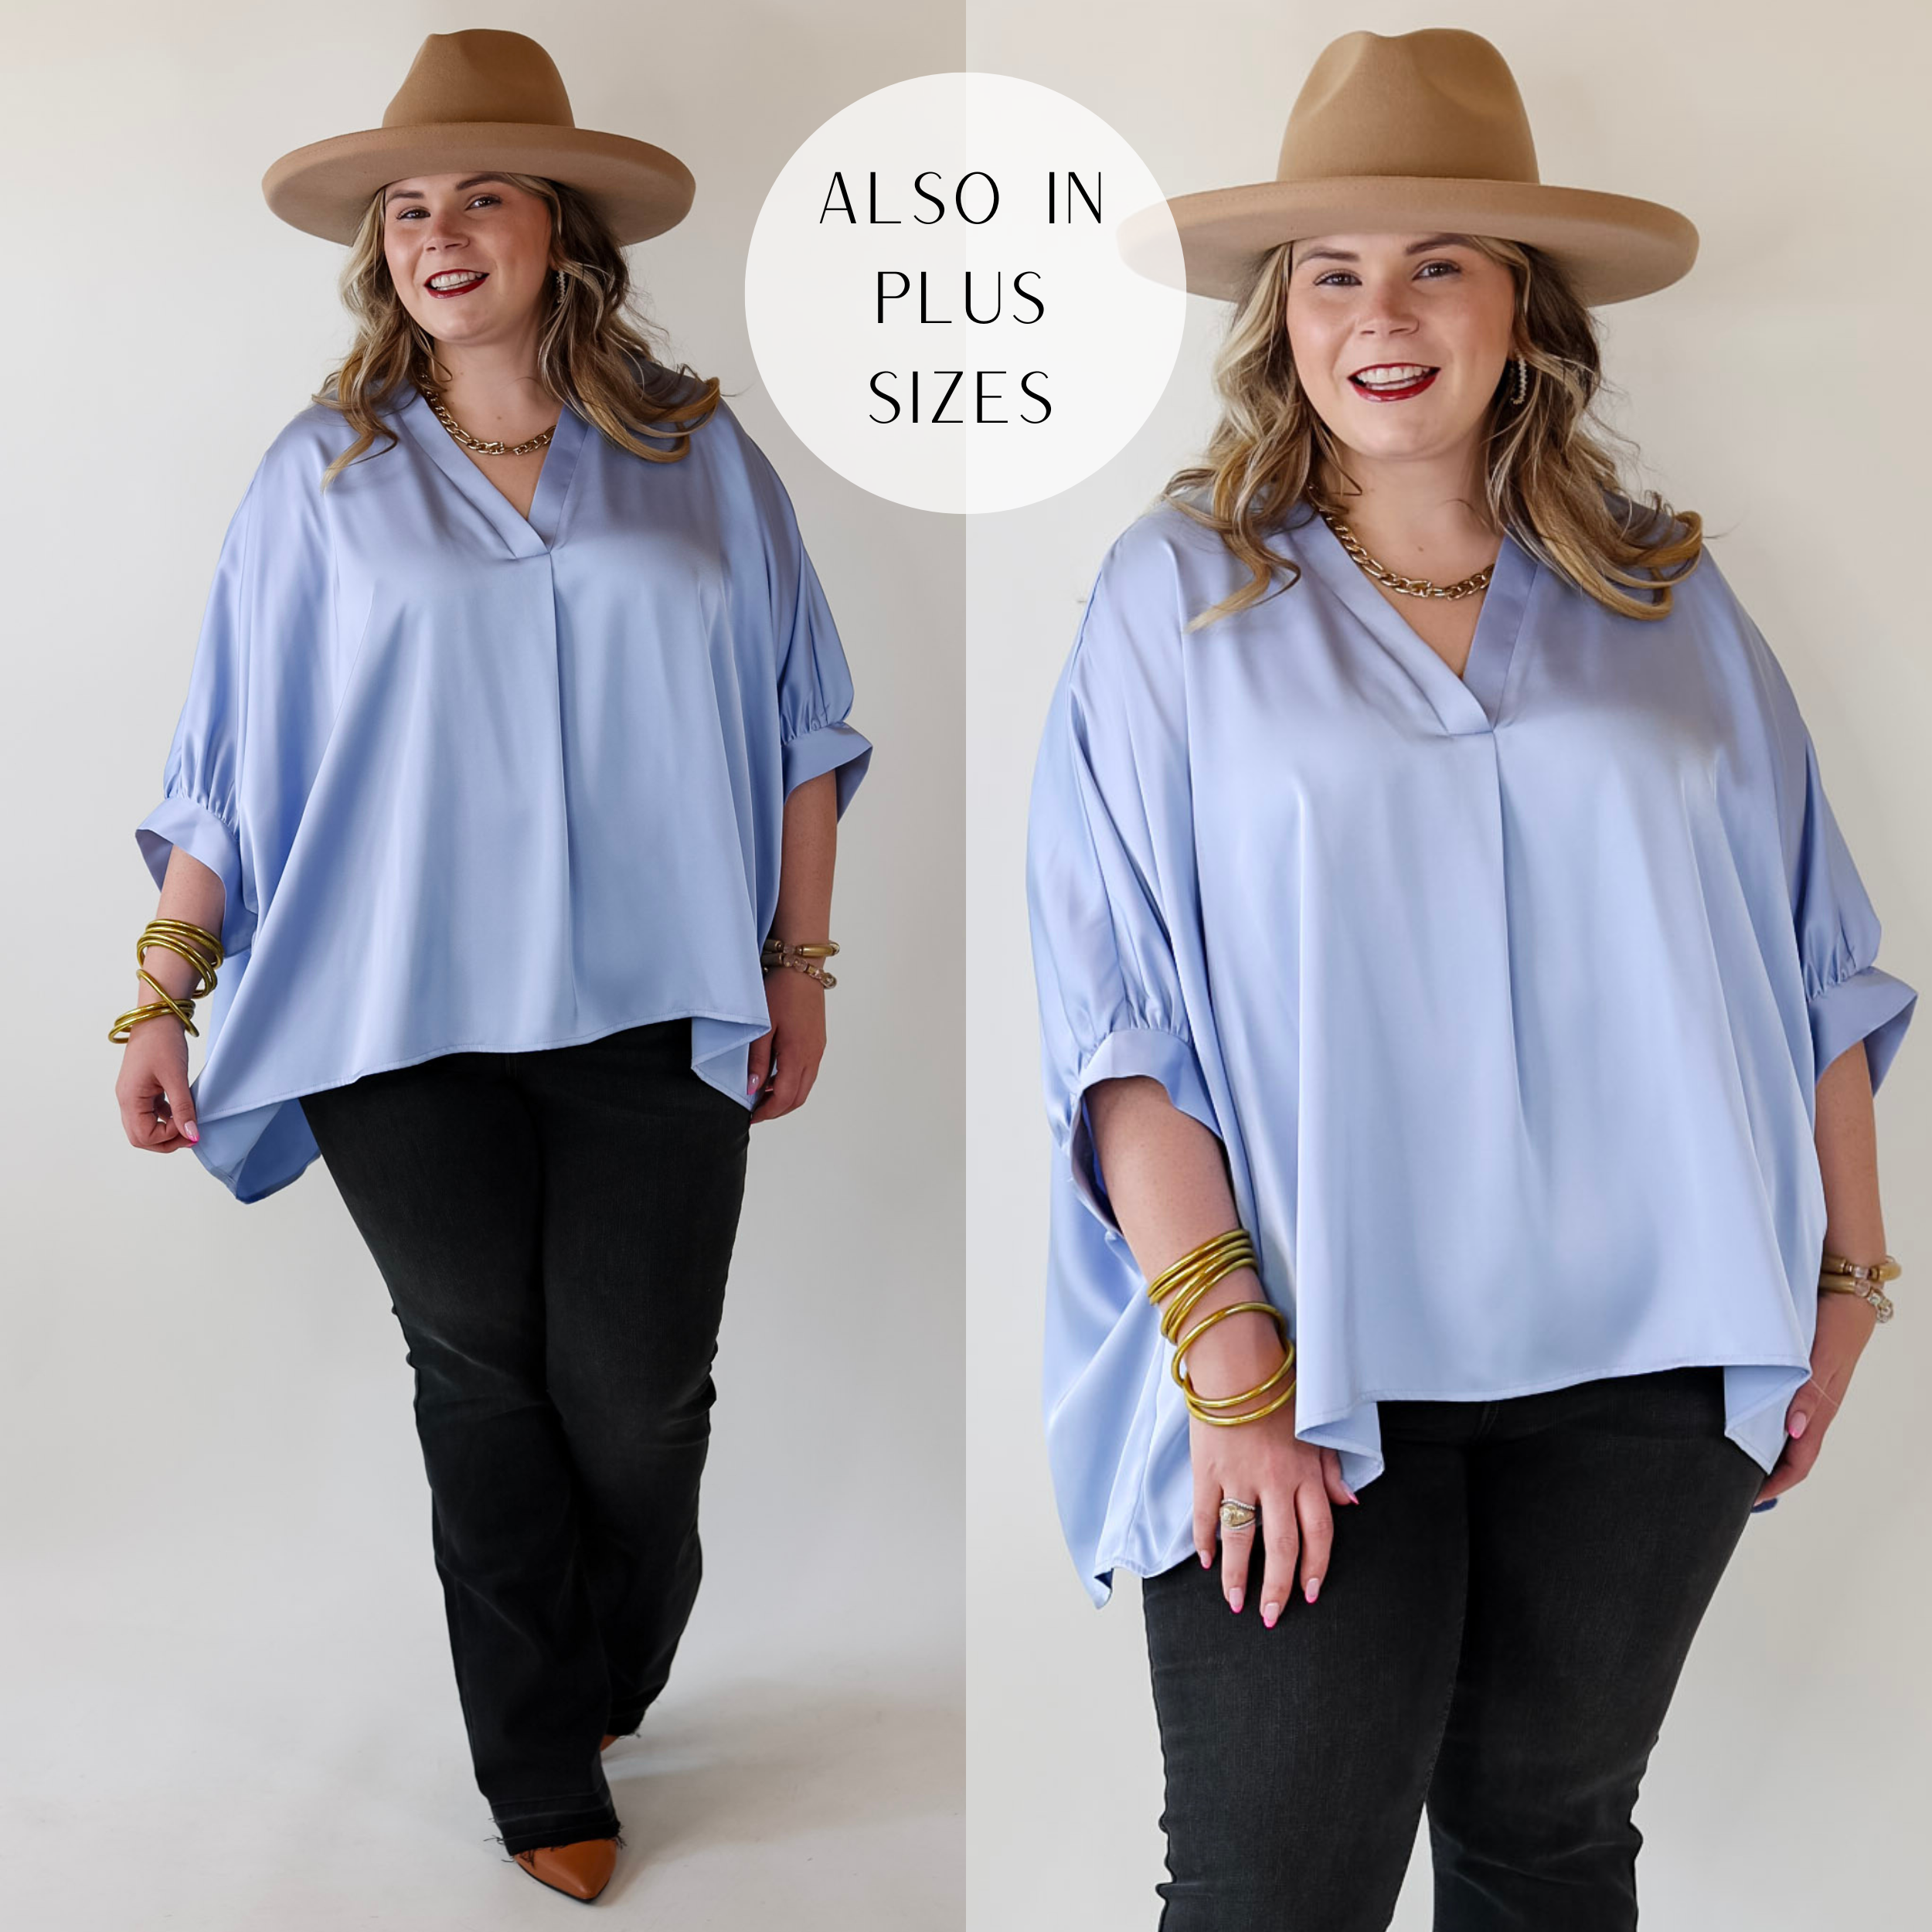 Irresistibly Chic Half Sleeve Oversized Blouse in Light Blue